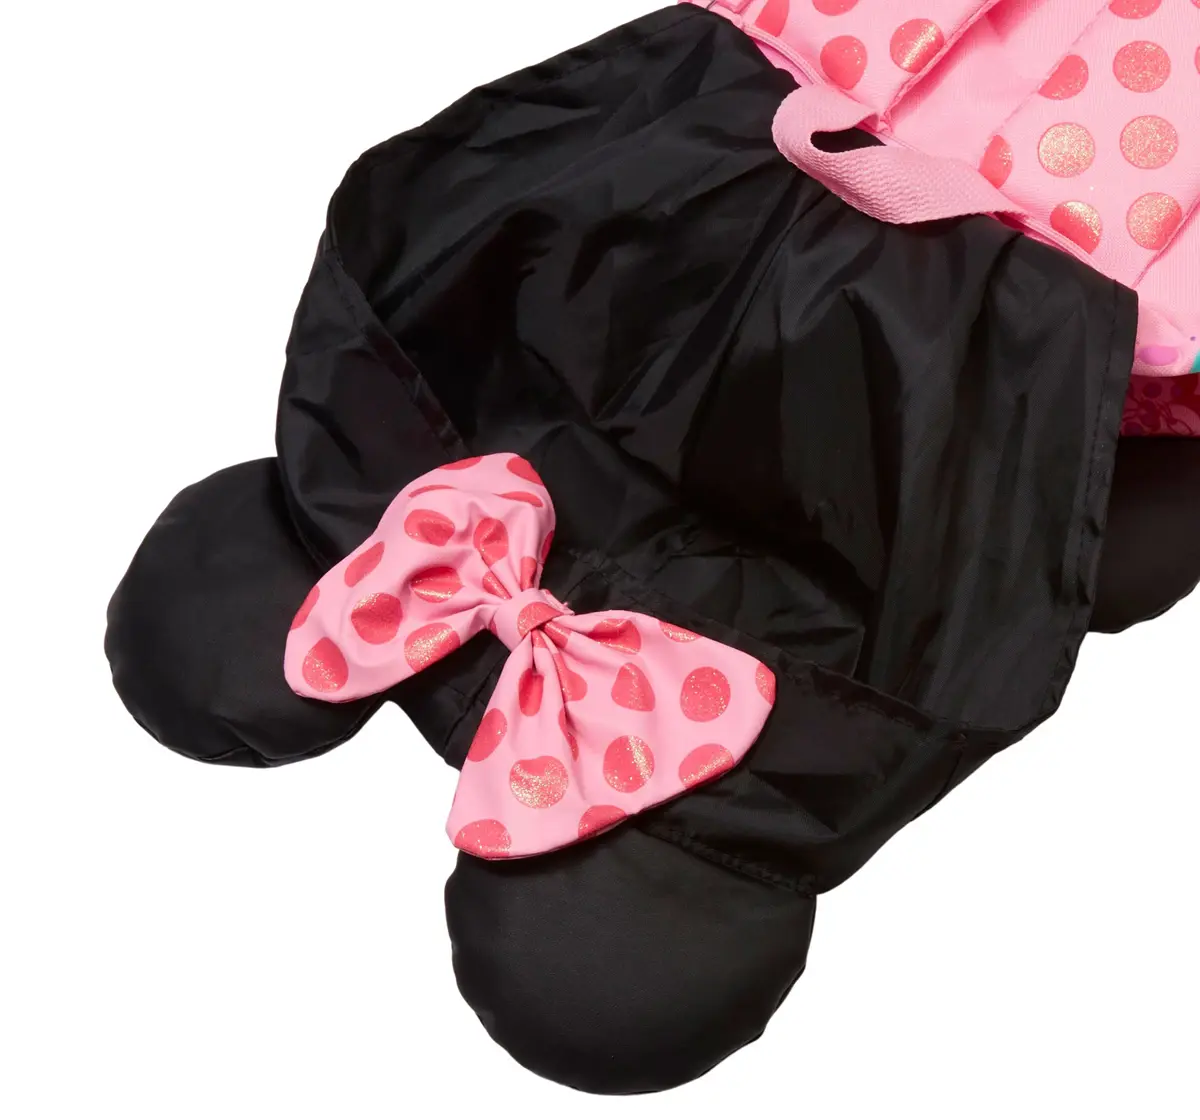 Smiggle Minnie Mouse Hoodie Confetti Junior Backpack, Pink, 3Y+